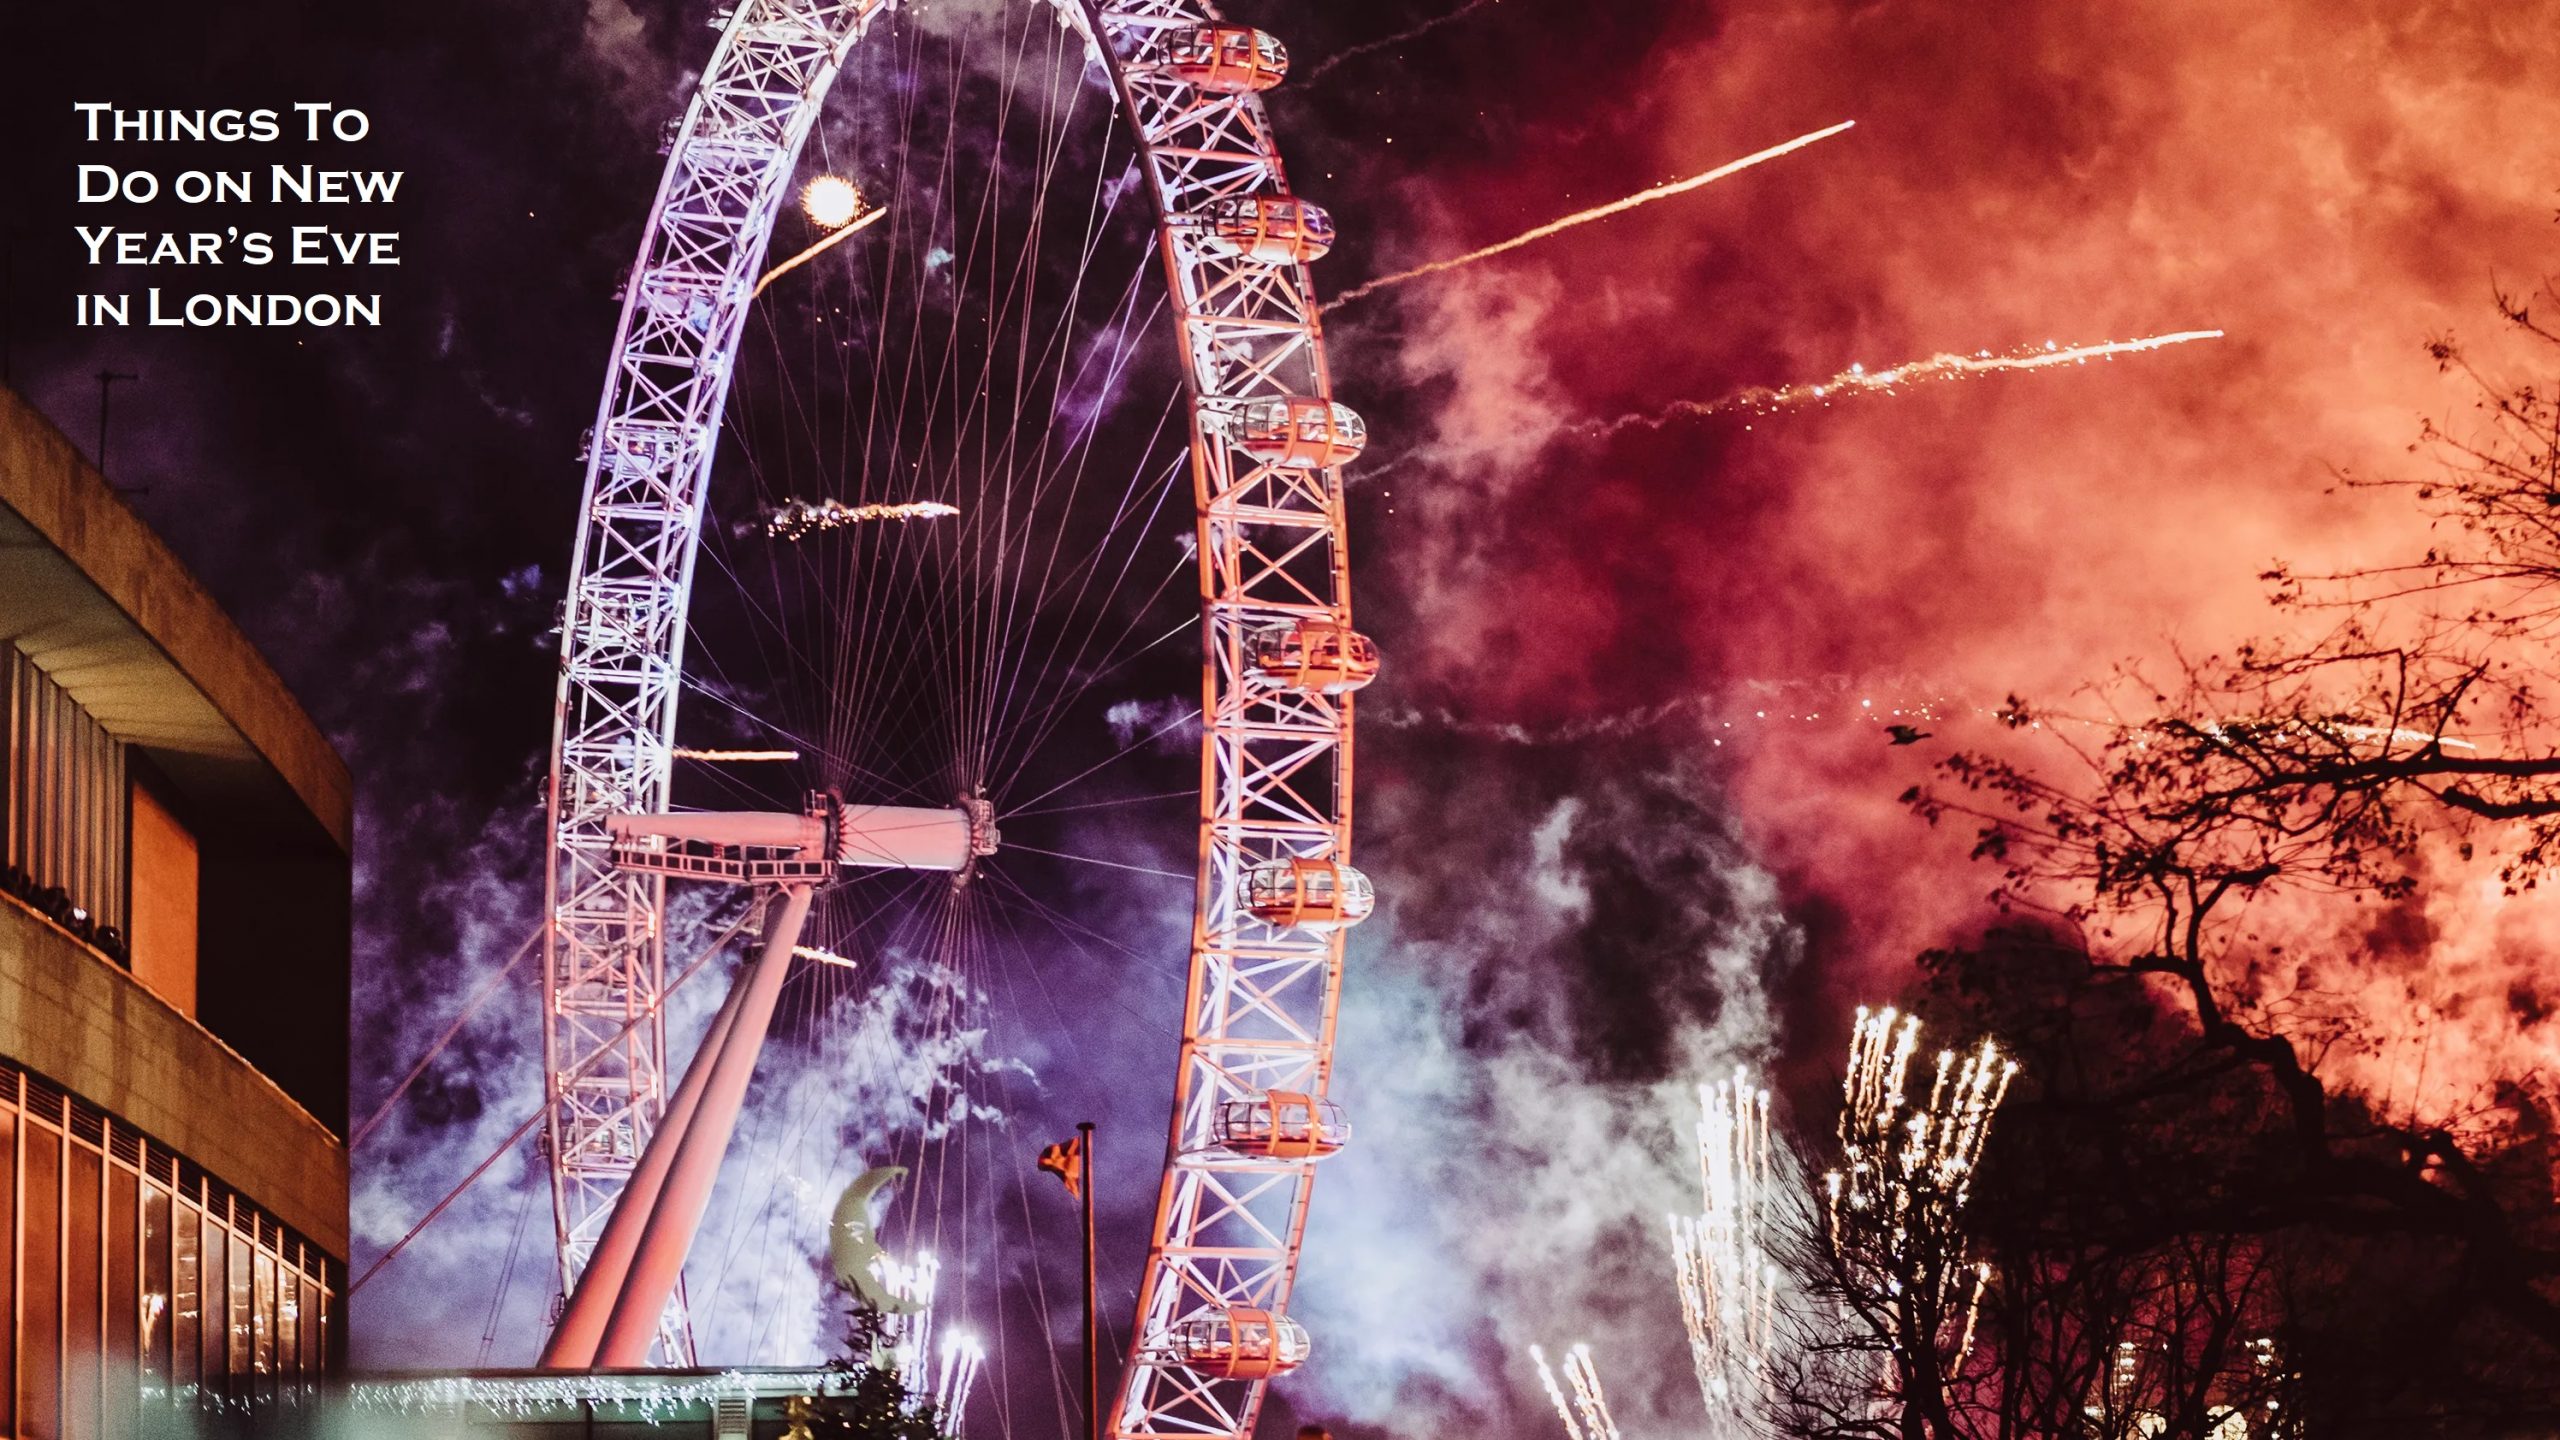 Things To Do on New Year’s Eve in London